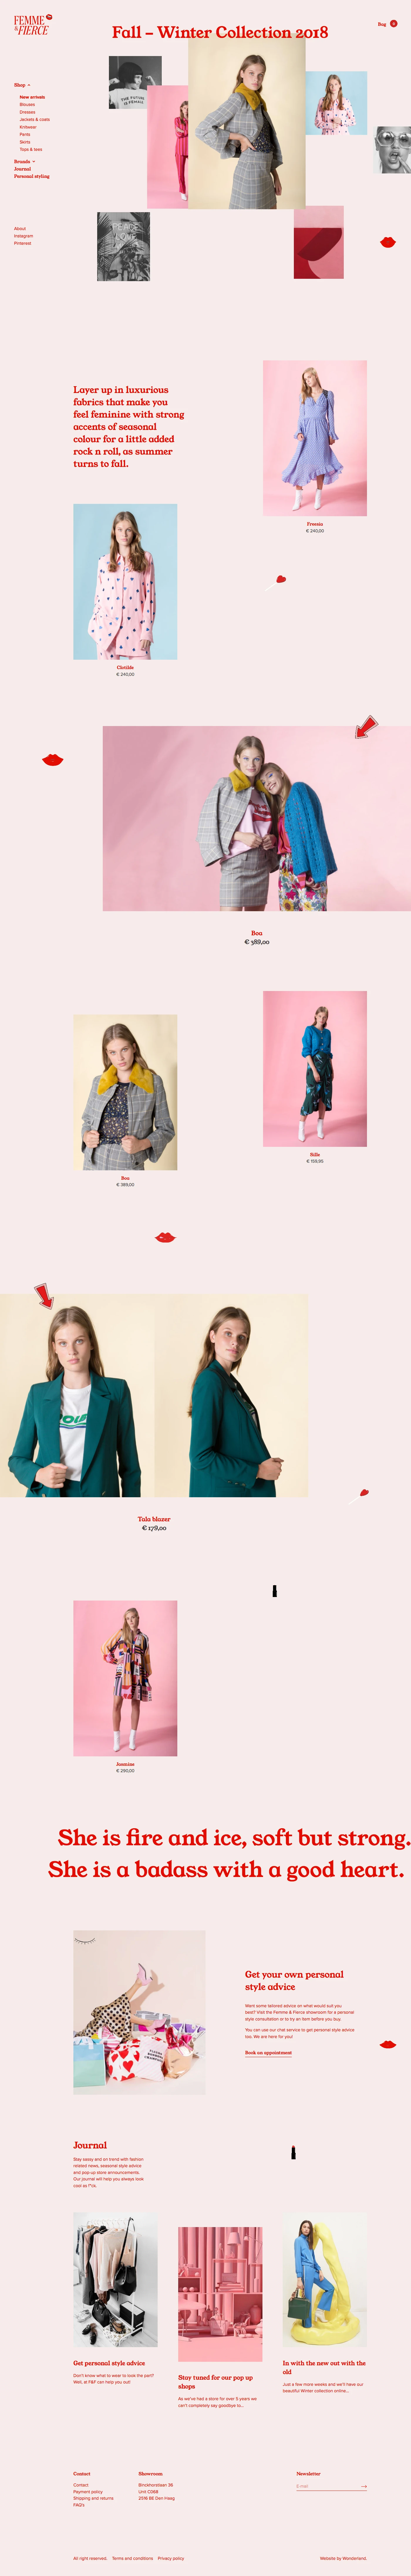 Femme & Fierce Landing Page Example: A collection of personally selected clothes, from the worlds best independent fashion brands, to make girlbosses feel damn-fine.